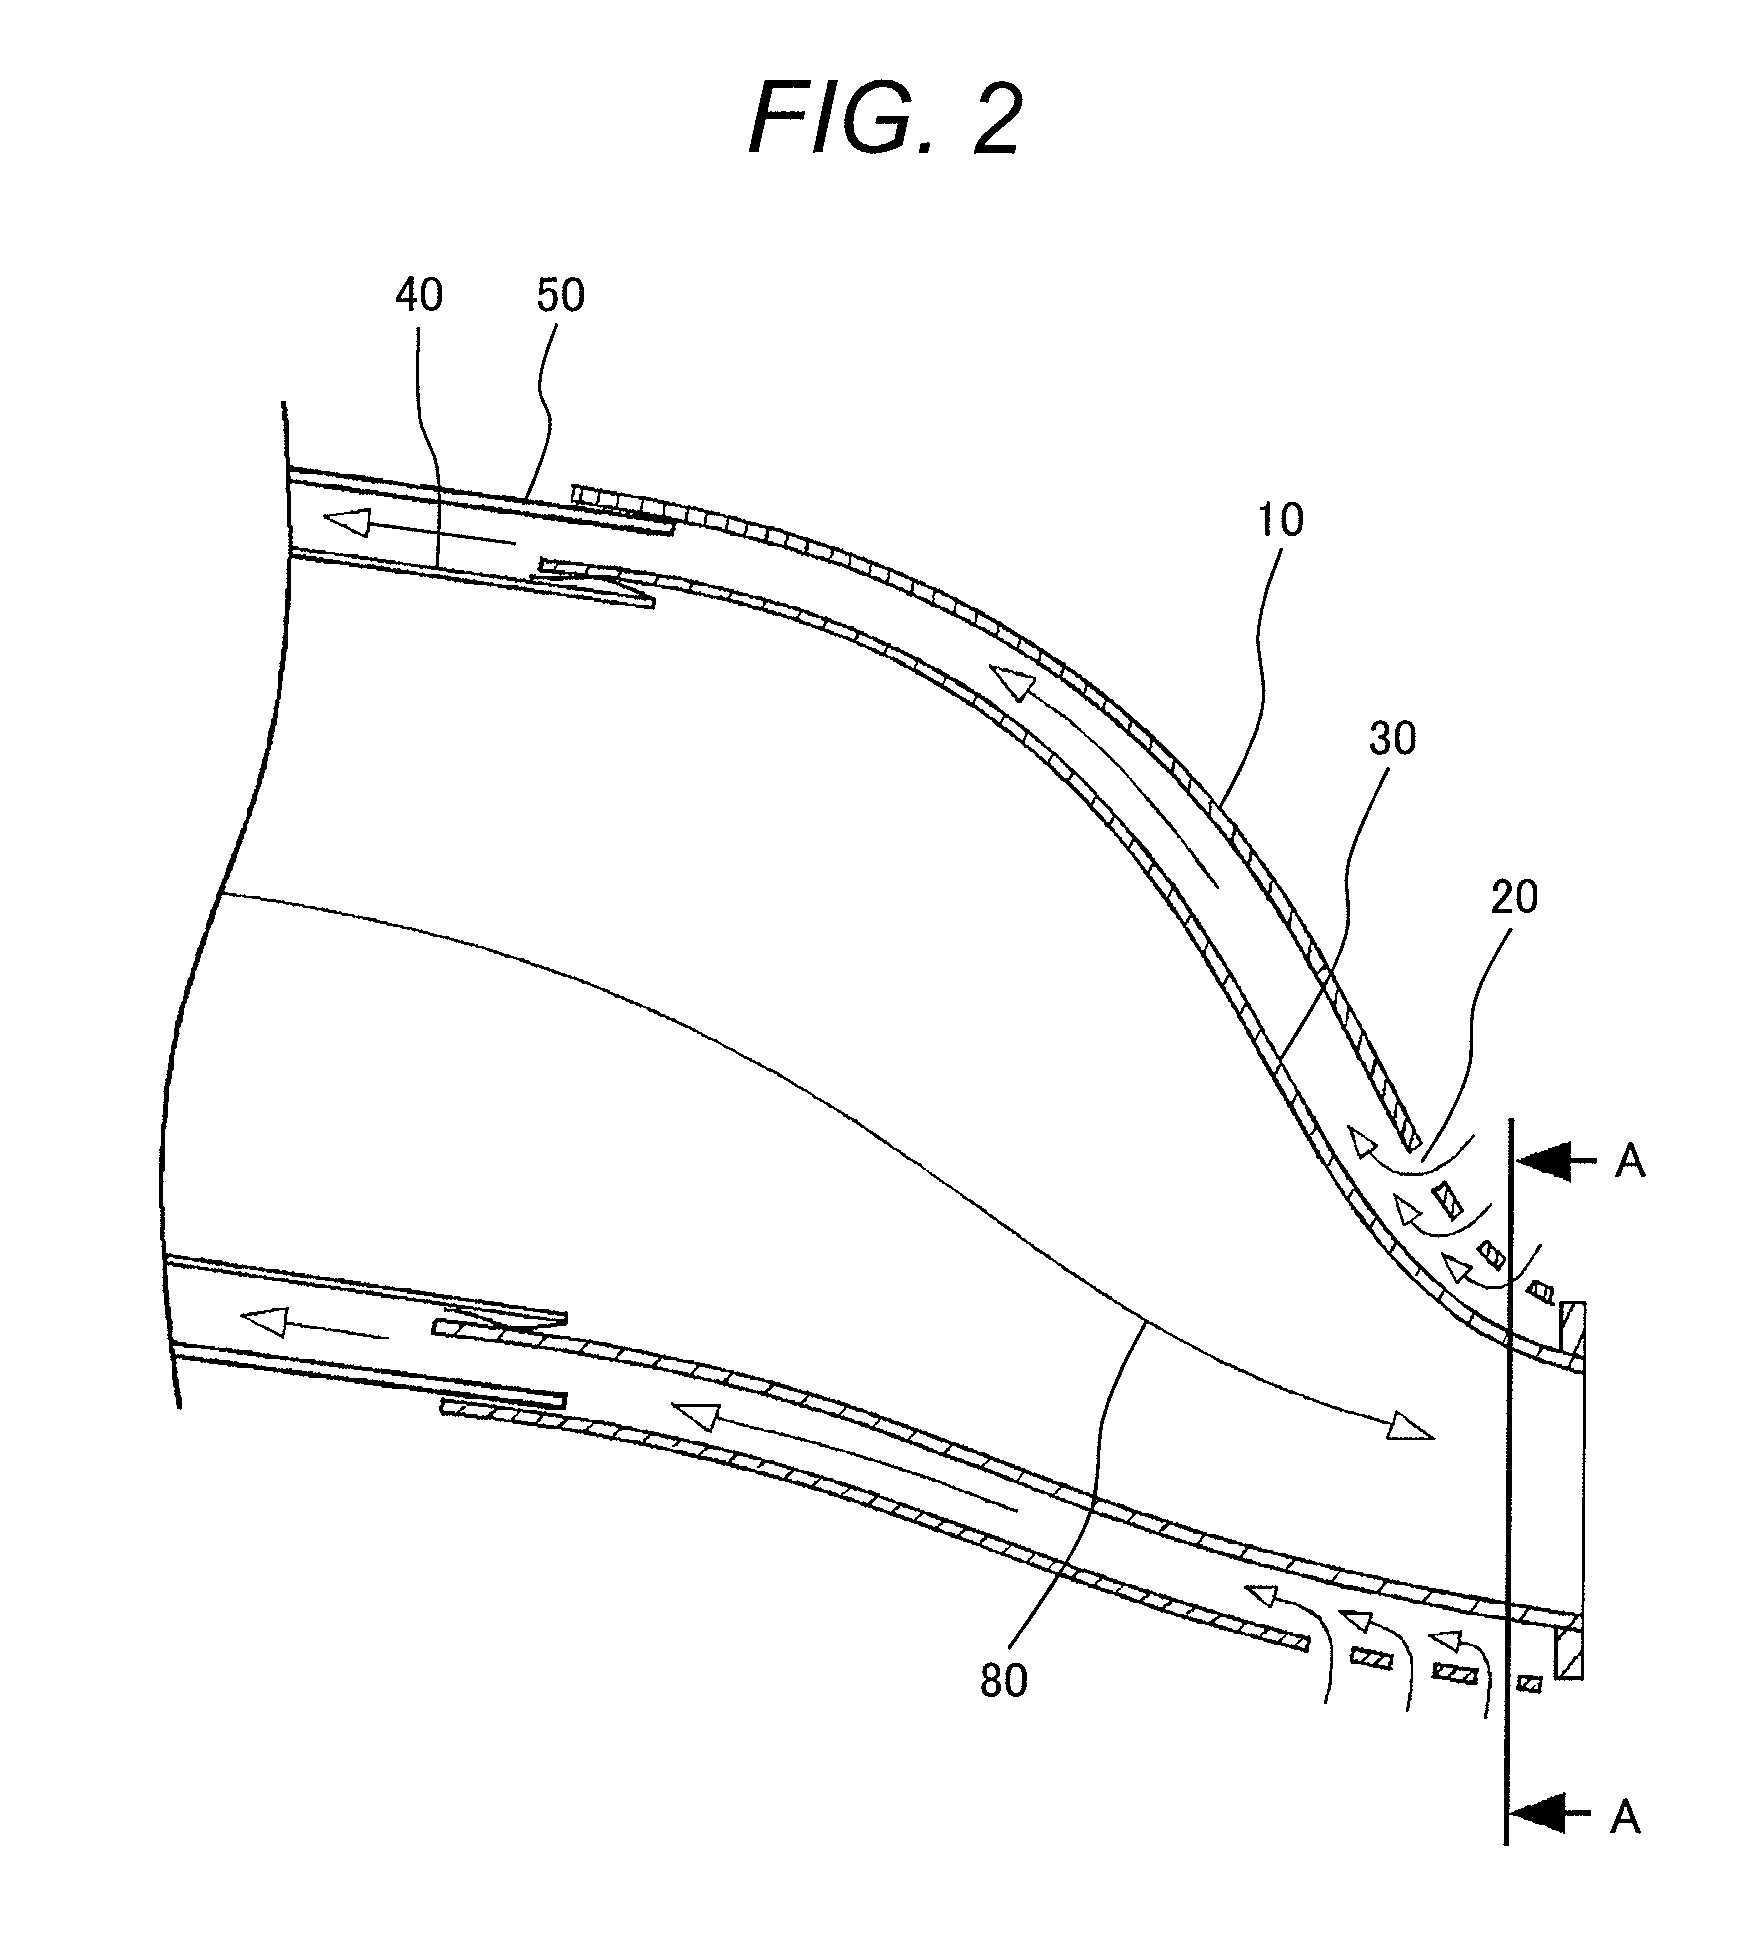 Gas turbine combustor including a transition piece flow sleeve wrapped on an outside surface of a transition piece